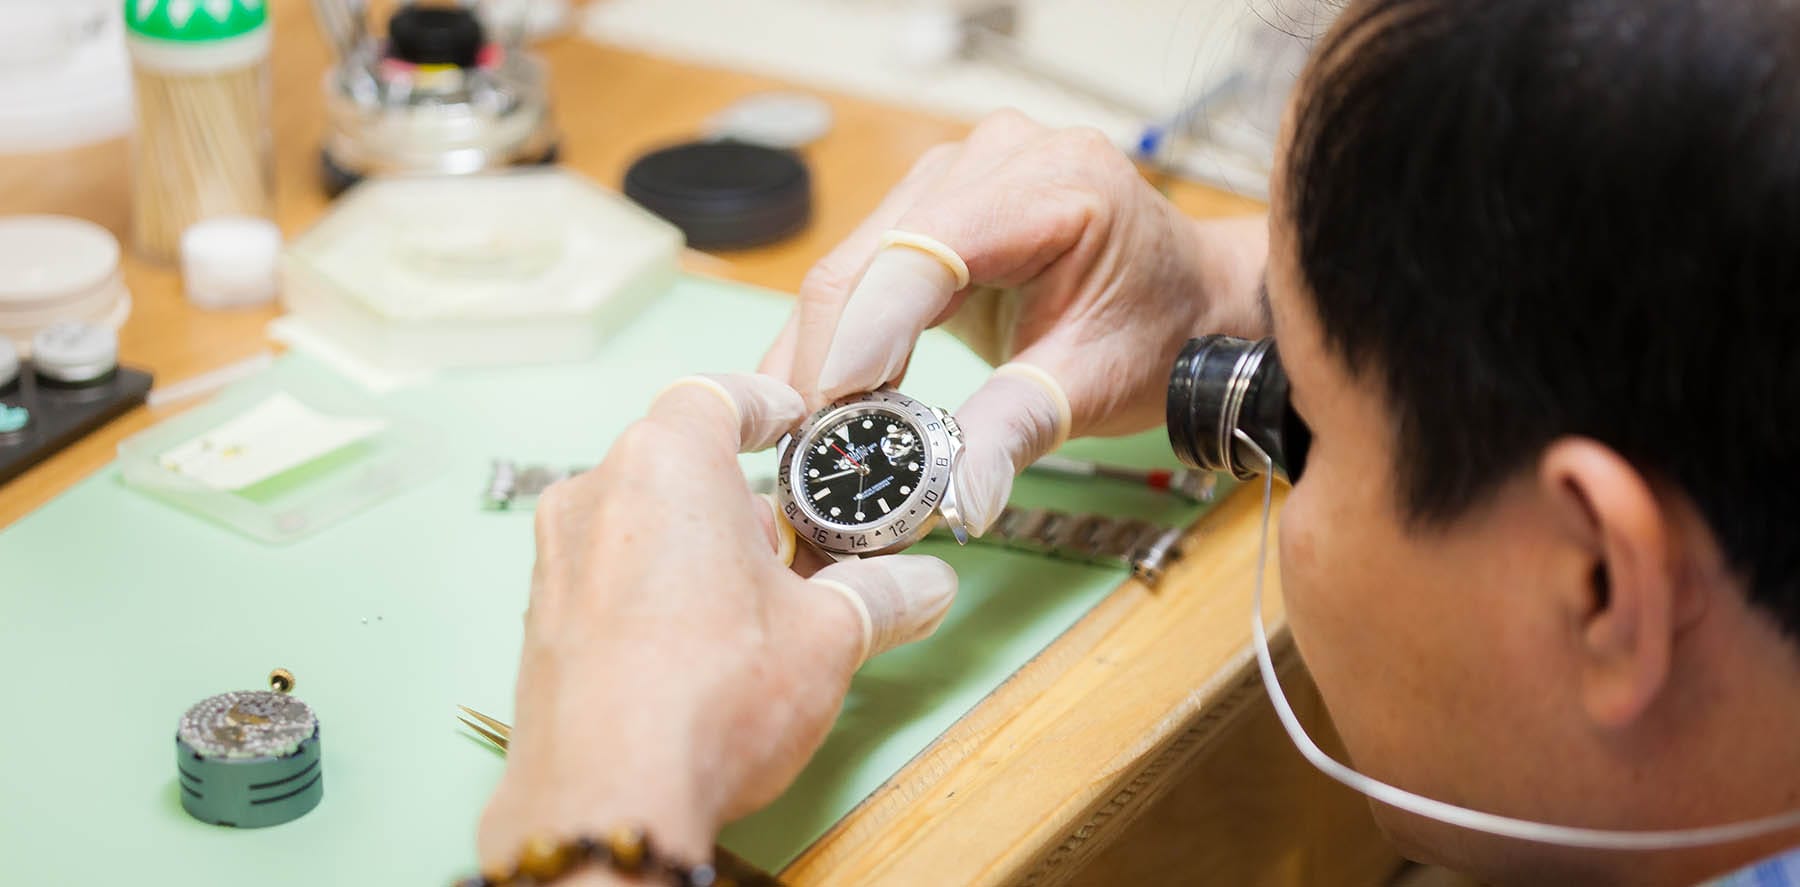 How To Service Your Rolex | Bob's Watches